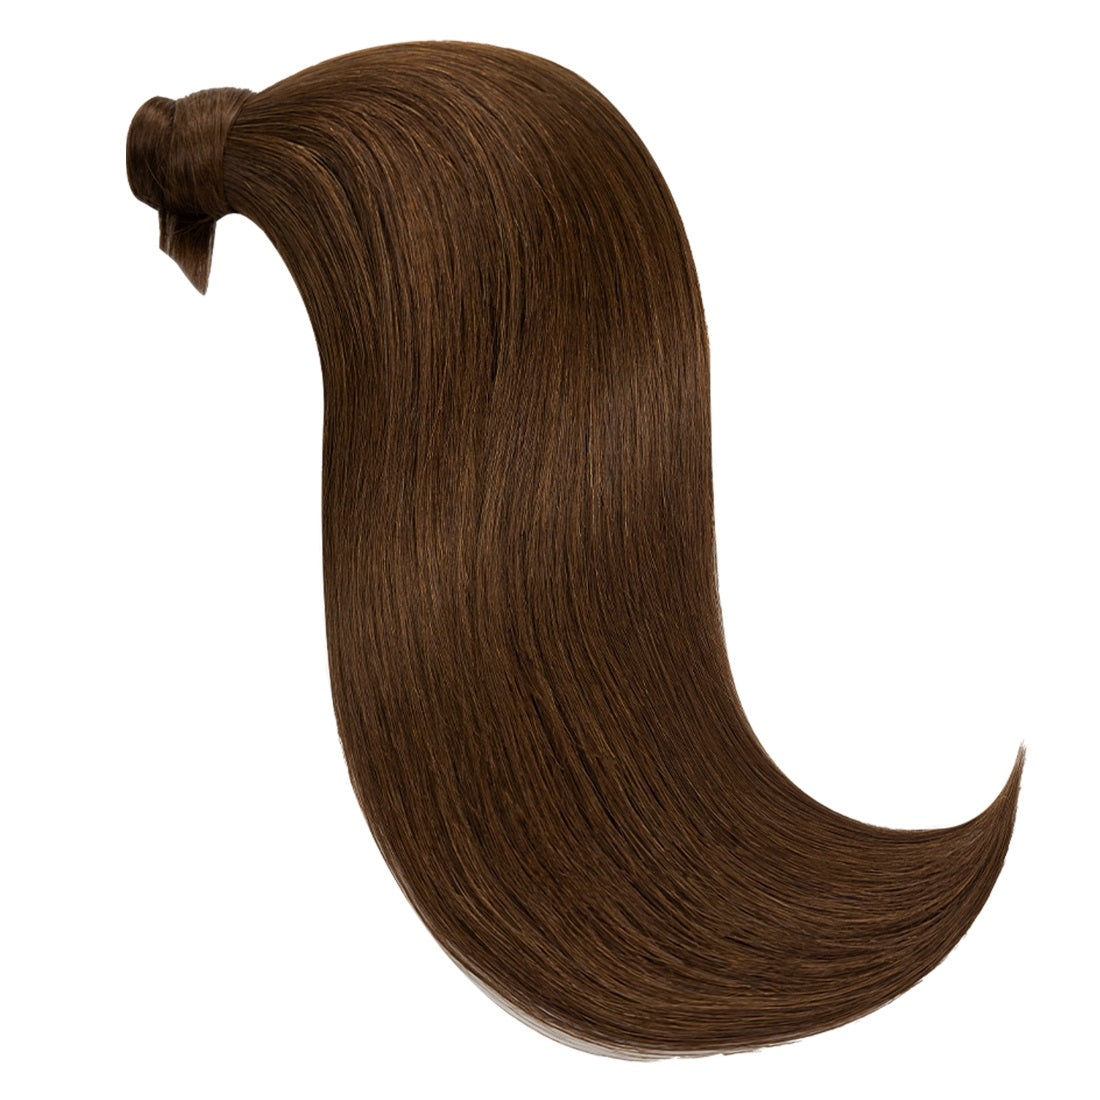 #4 Medium Brown Ponytail Extension Clip in Ponytail Hair Extensions